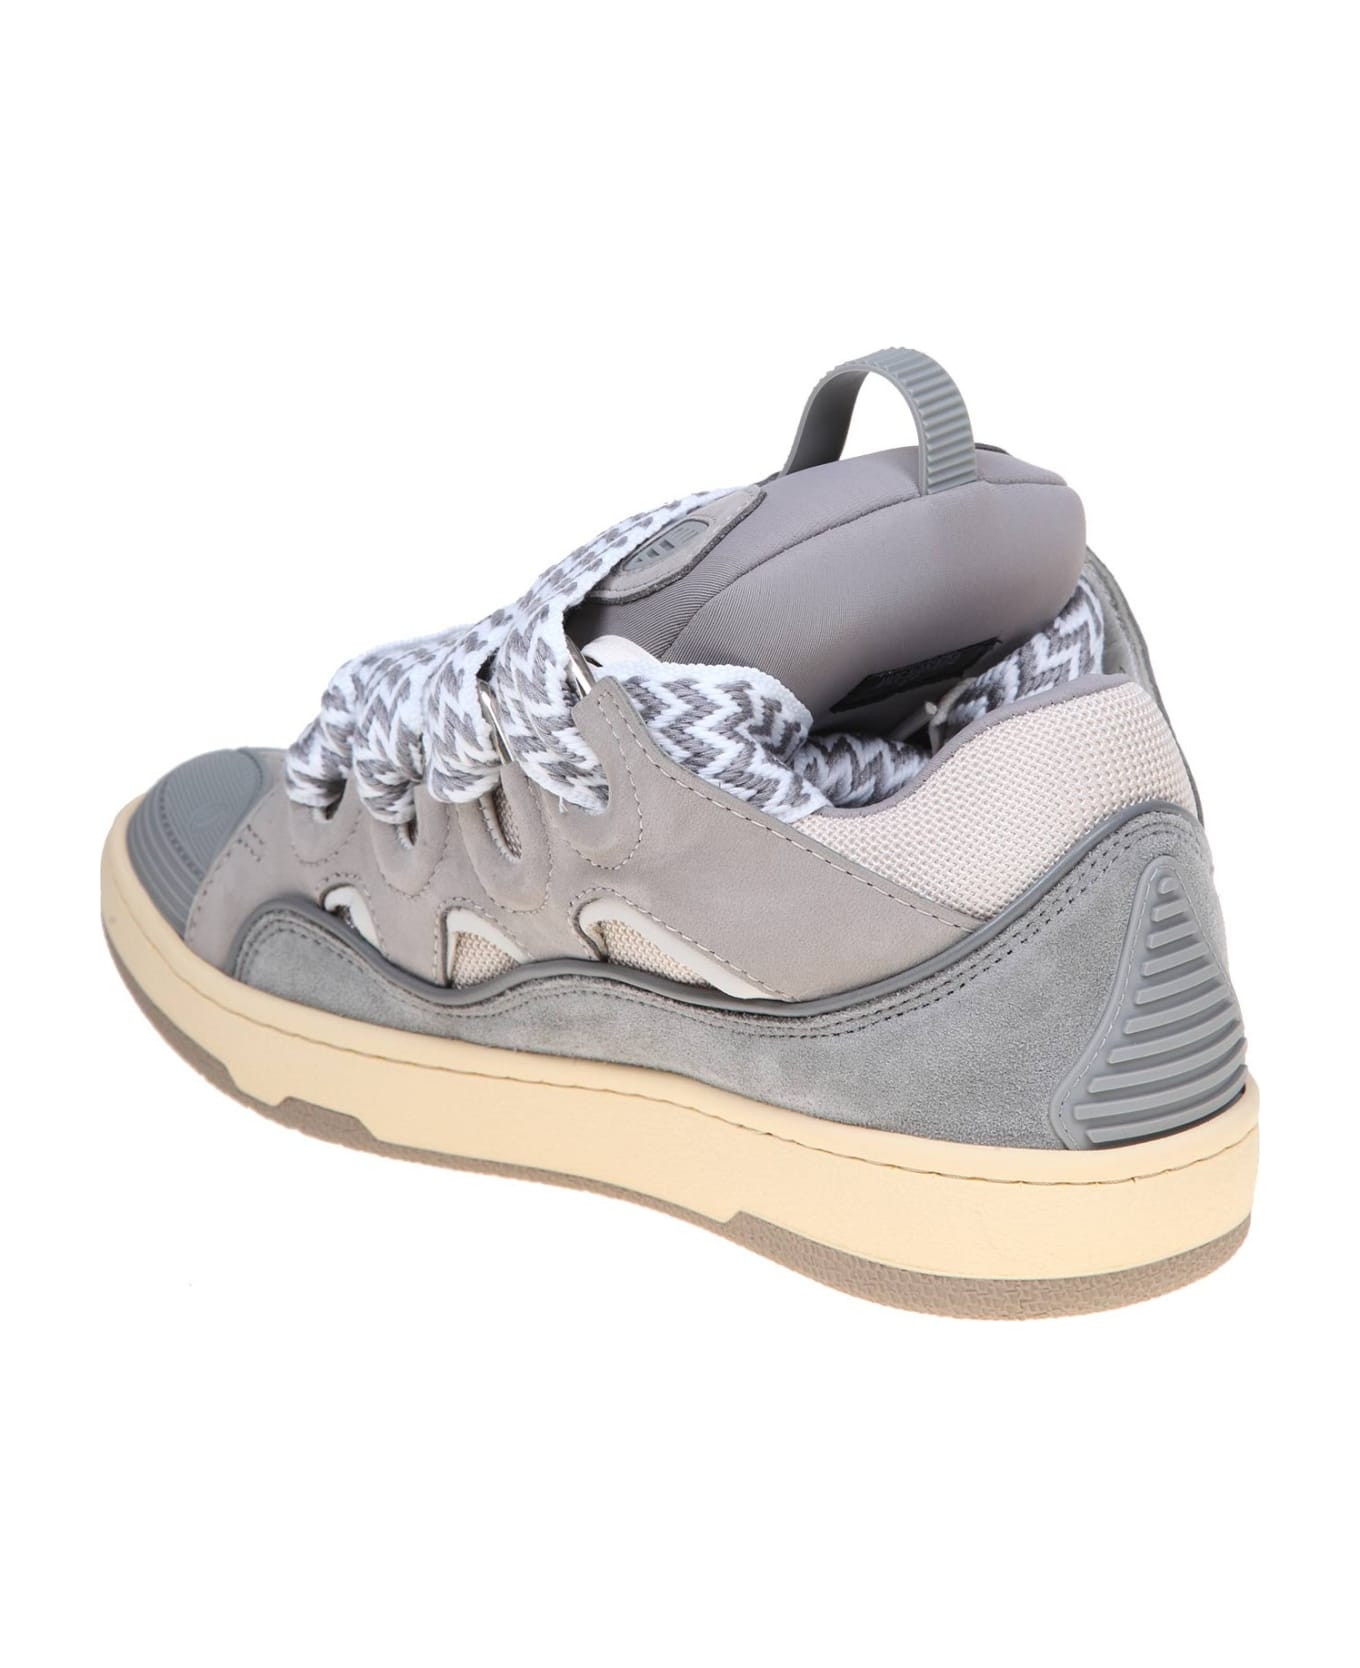 Lanvin Curb Sneakers In Suede And Gray Fabric - GREY